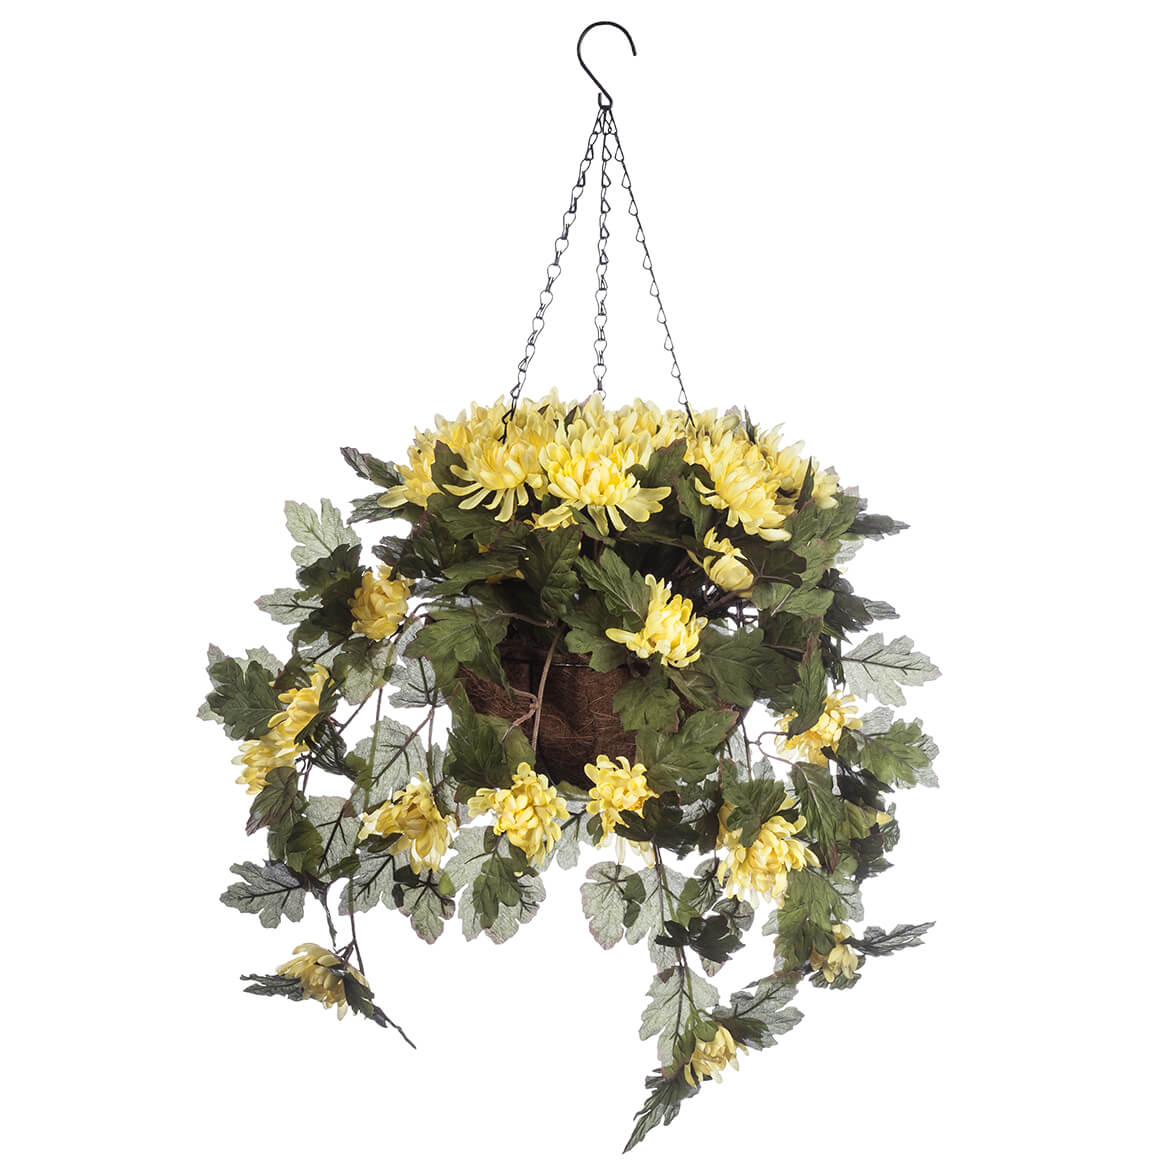 OakRidge Fully Assembled Artificial Mum Hanging Basket, Yellow, 10” Diameter with 18” Long Chain – Polyester/Plastic Flowers in Metal/Coco Fiber Liner Basket for Indoor/Outdoor Use - image 1 of 2